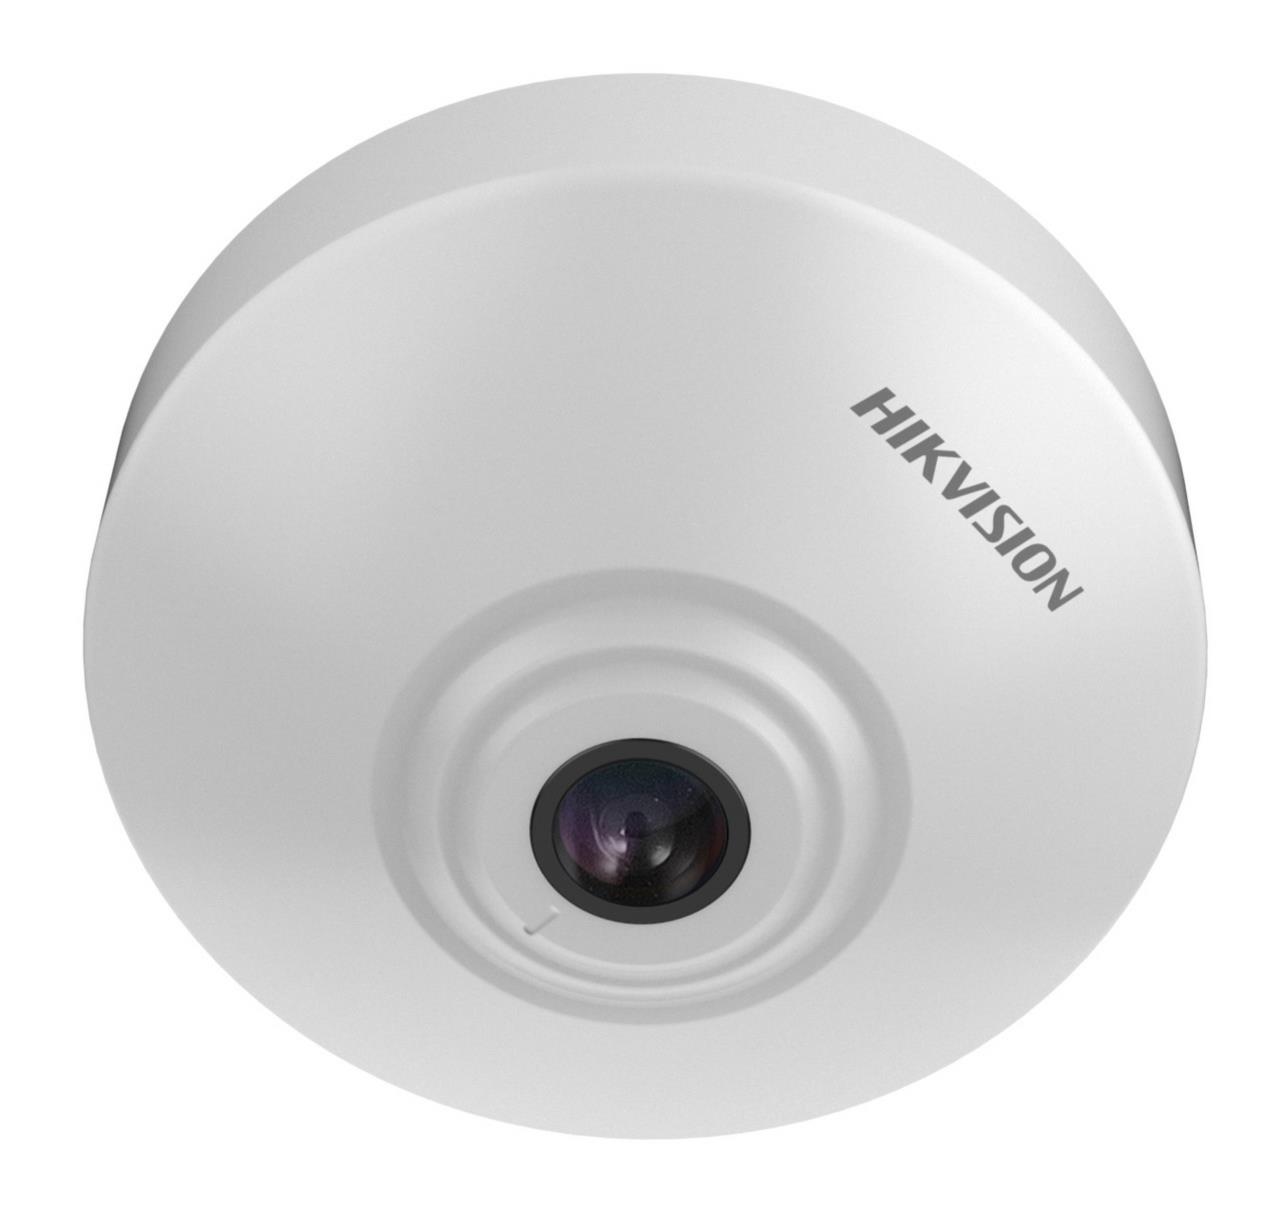 1.3MP Intelligent Network Camera, People Counting, WDR, 3D DNR